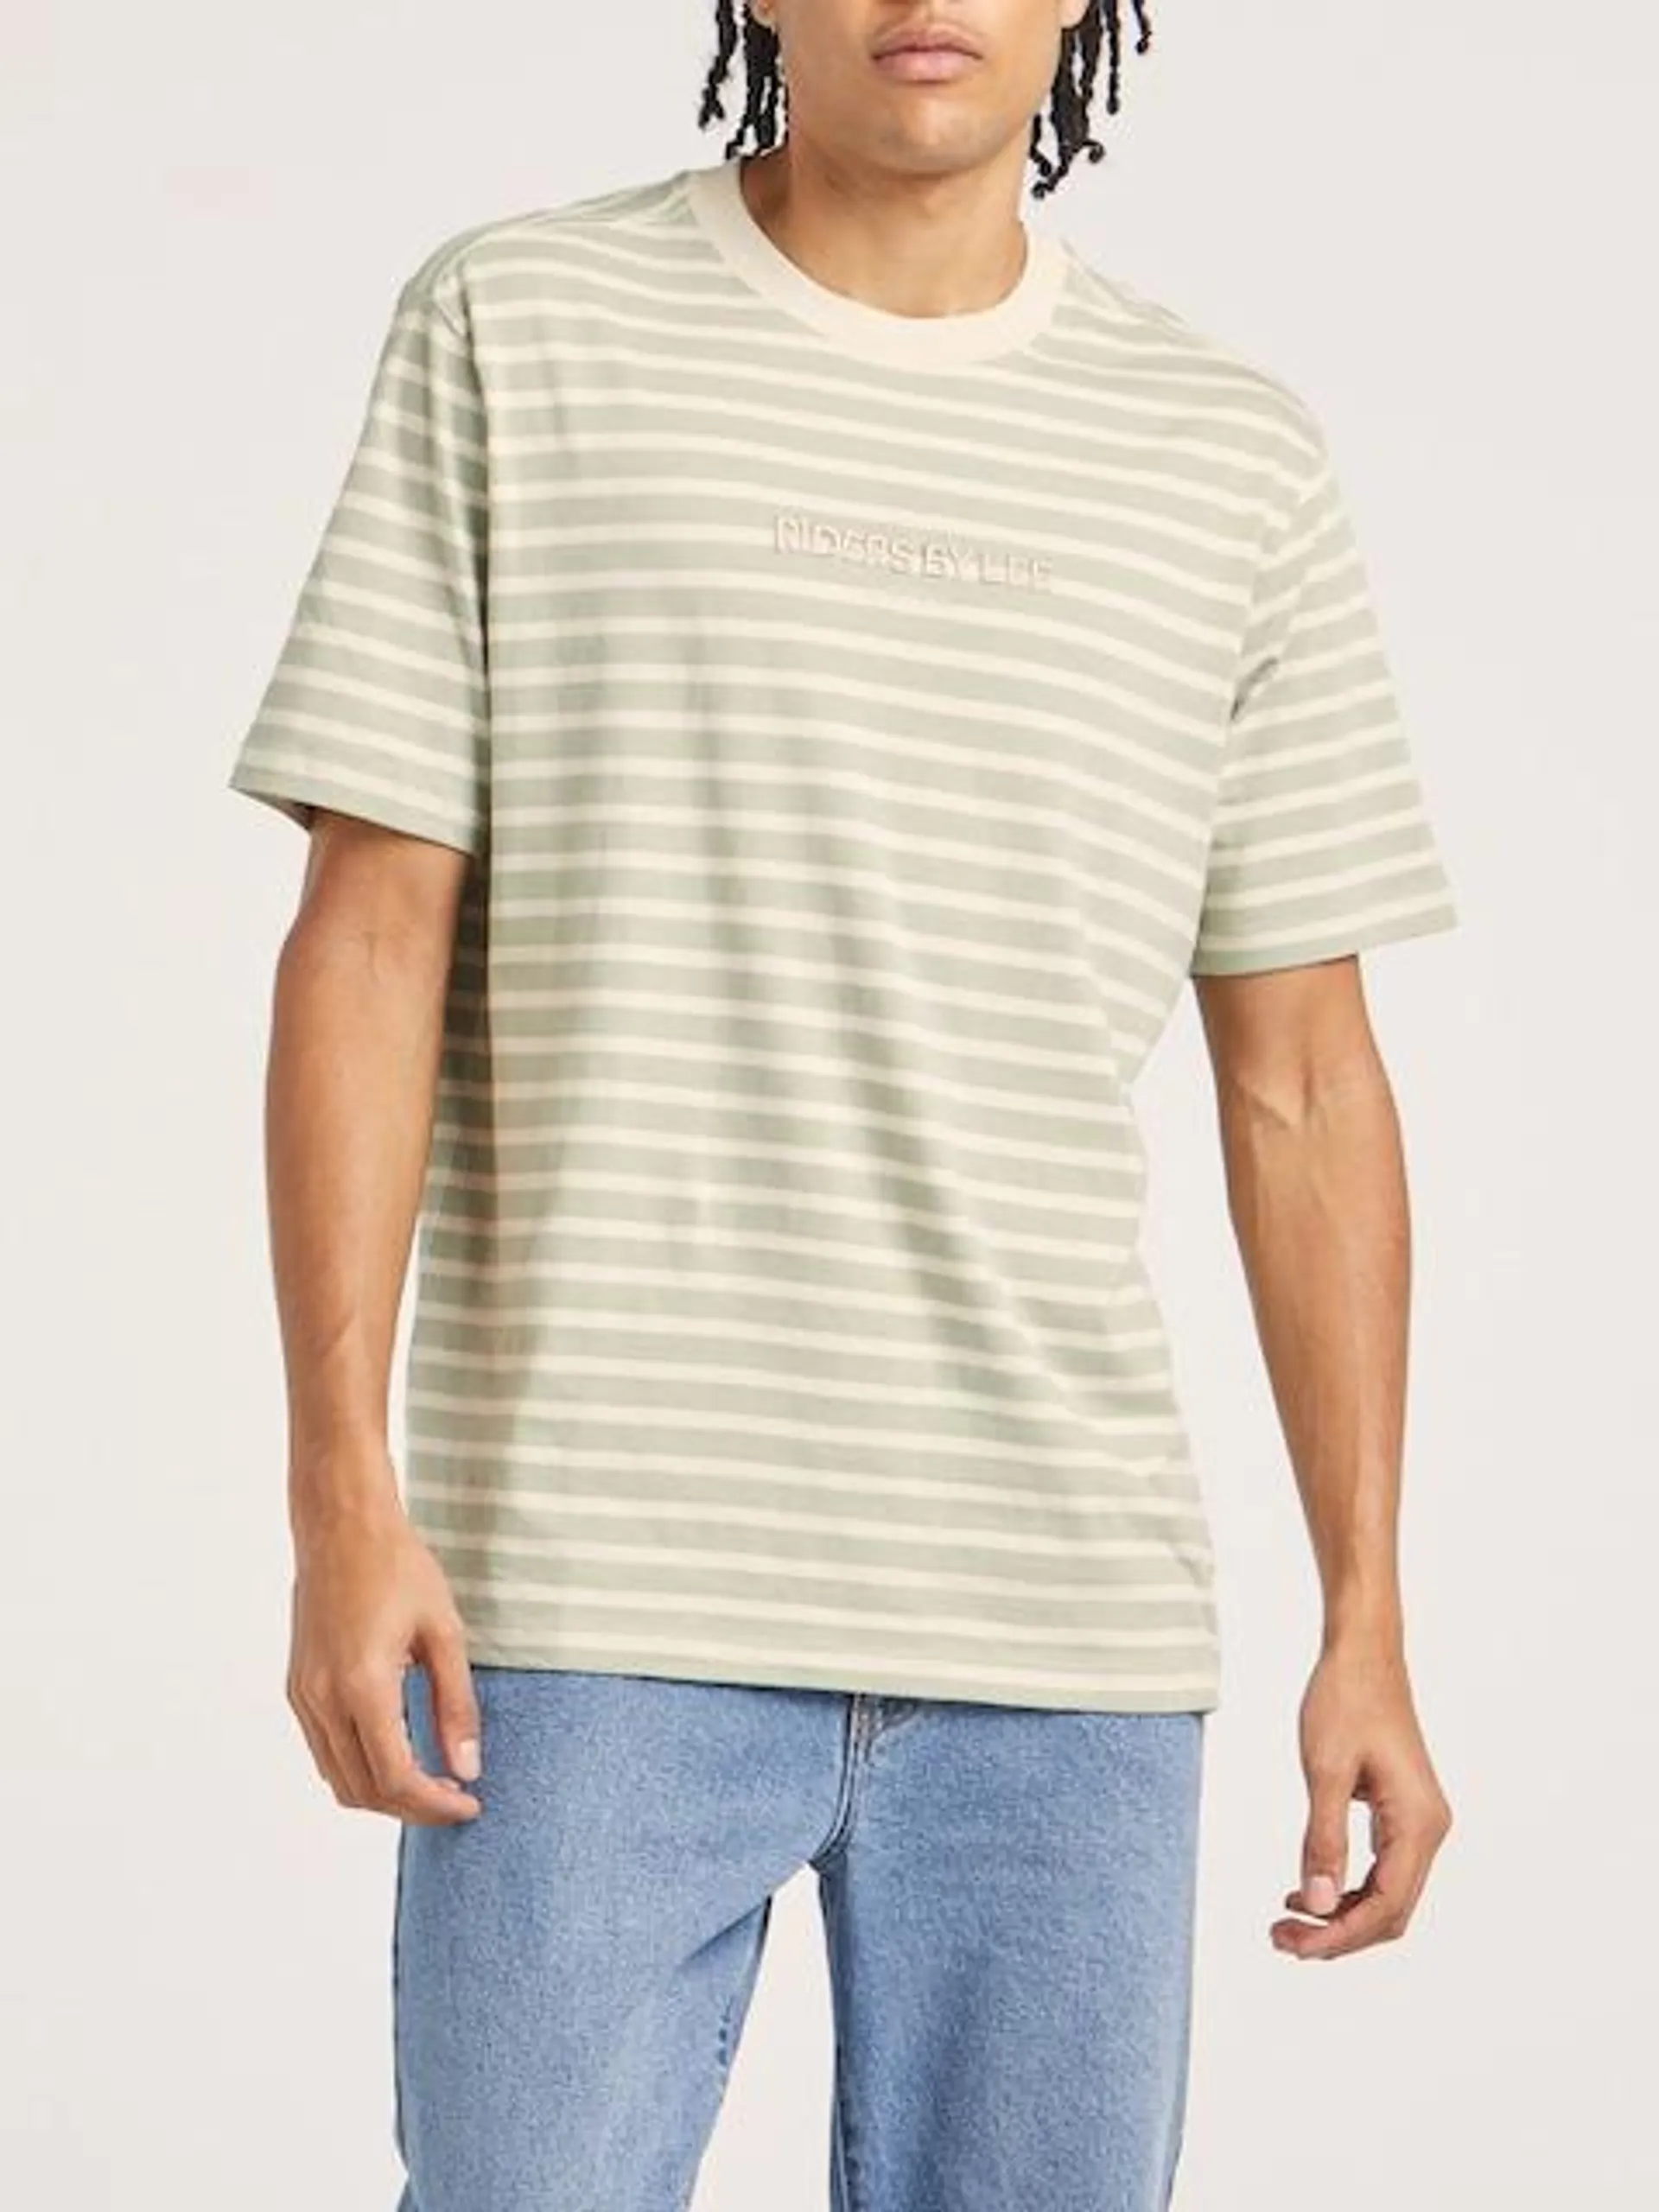 Riders By Lee Relaxed Tee In Sage Stripe